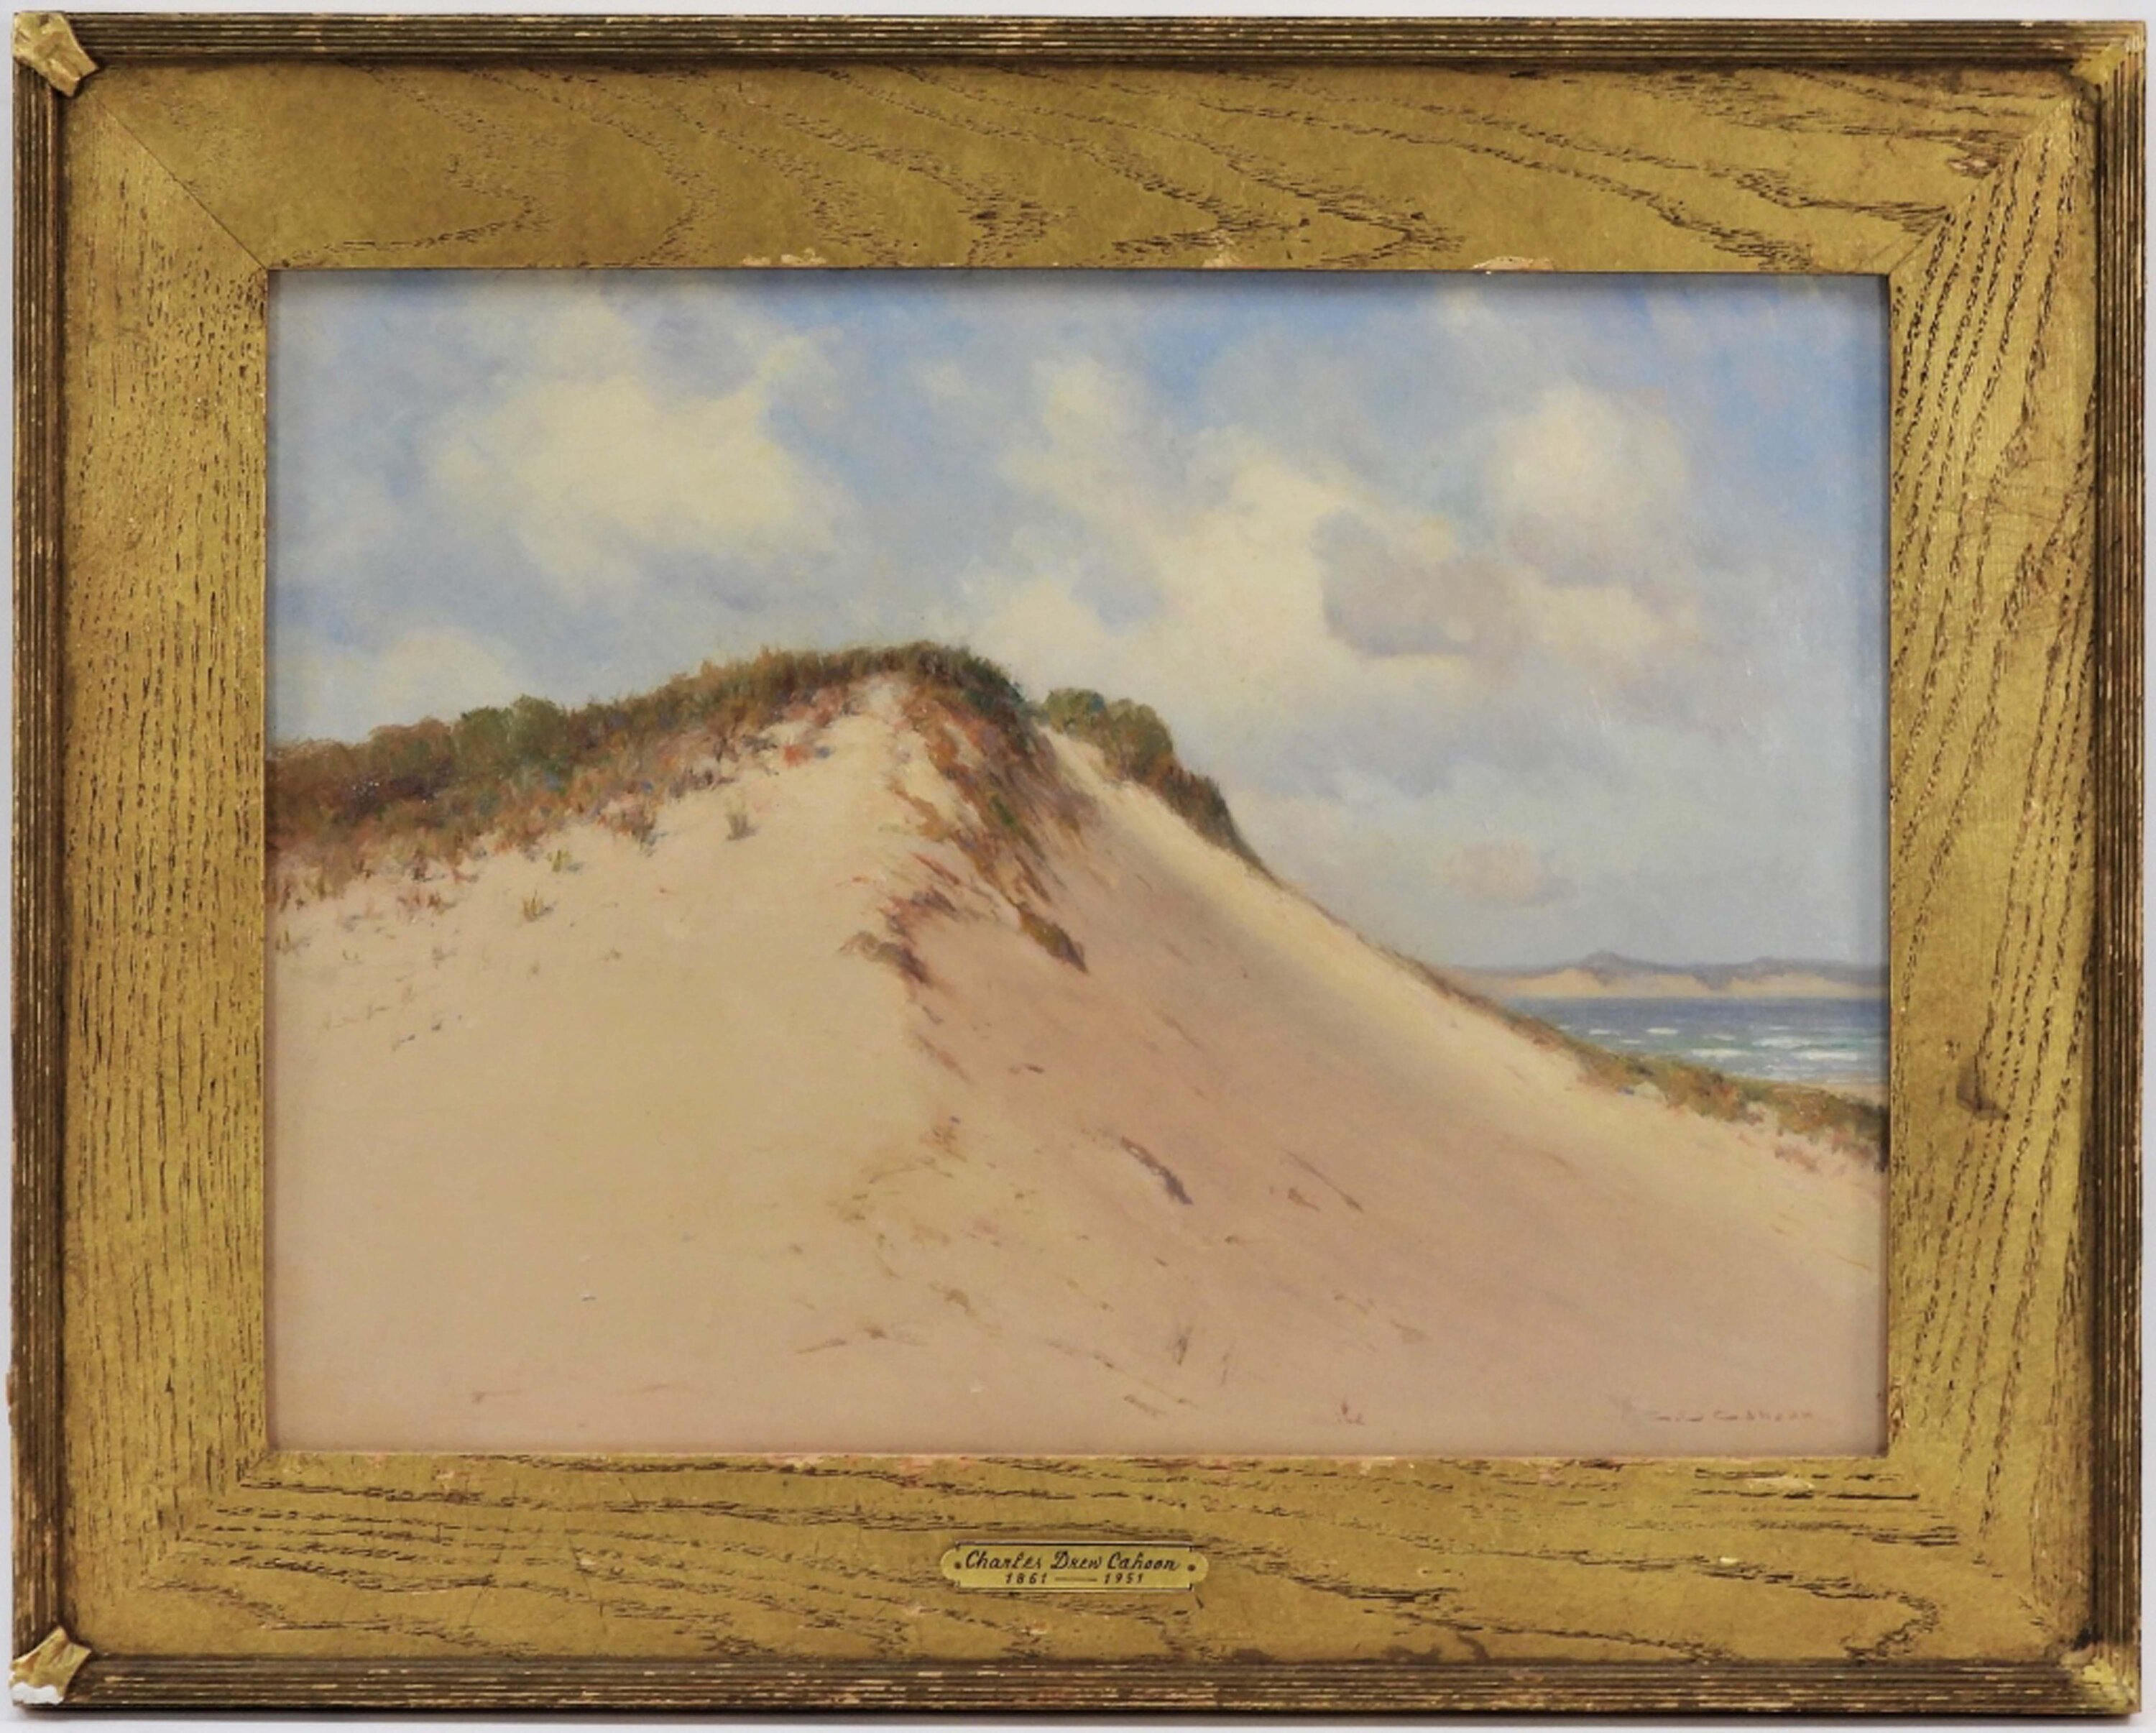 Impressionist seascape by Charles Drew Cahoon, est. $1,000-$1,500